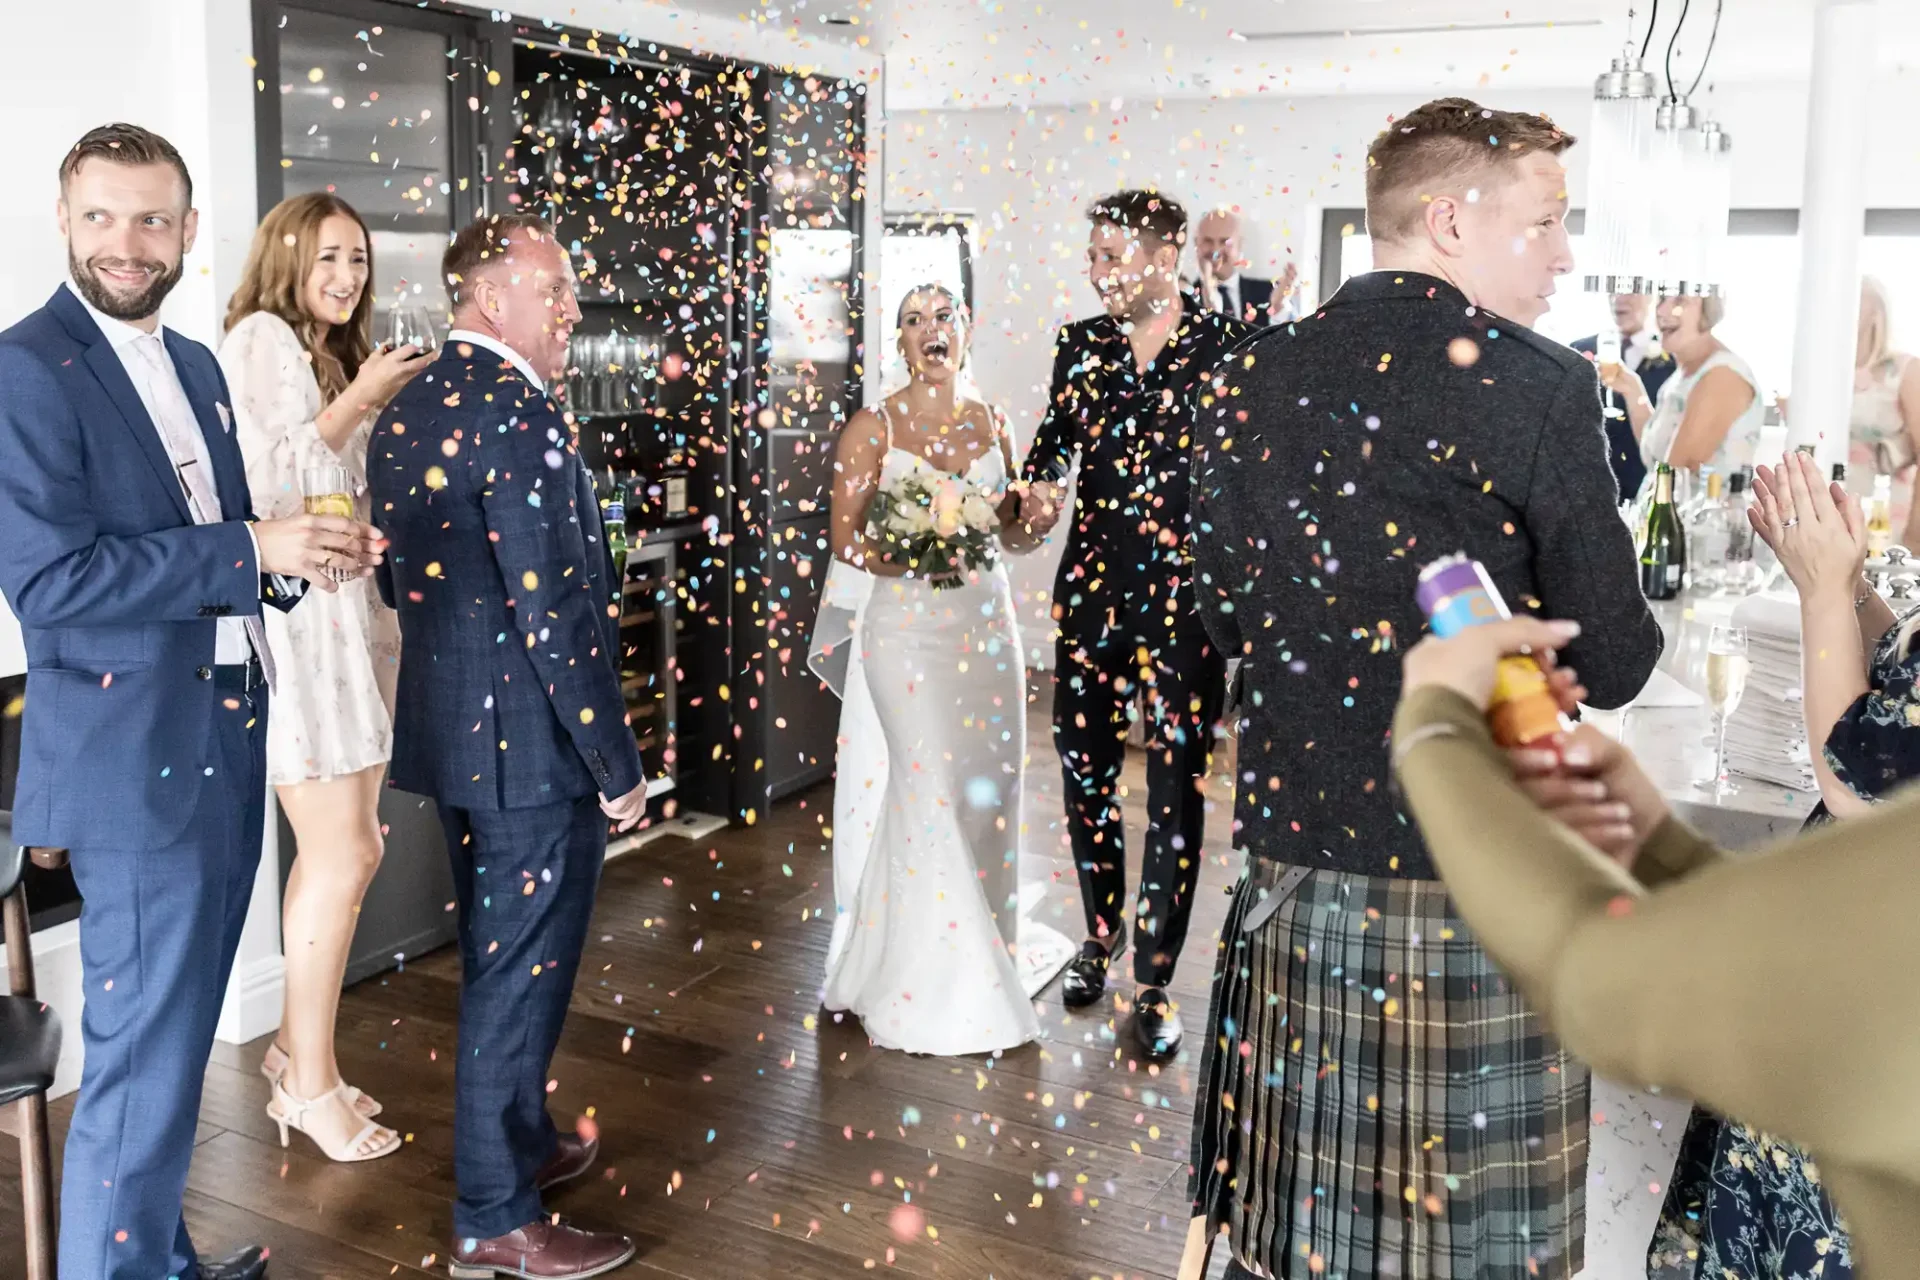 A joyful wedding scene with guests throwing confetti at the smiling bride and groom in a modern reception venue.